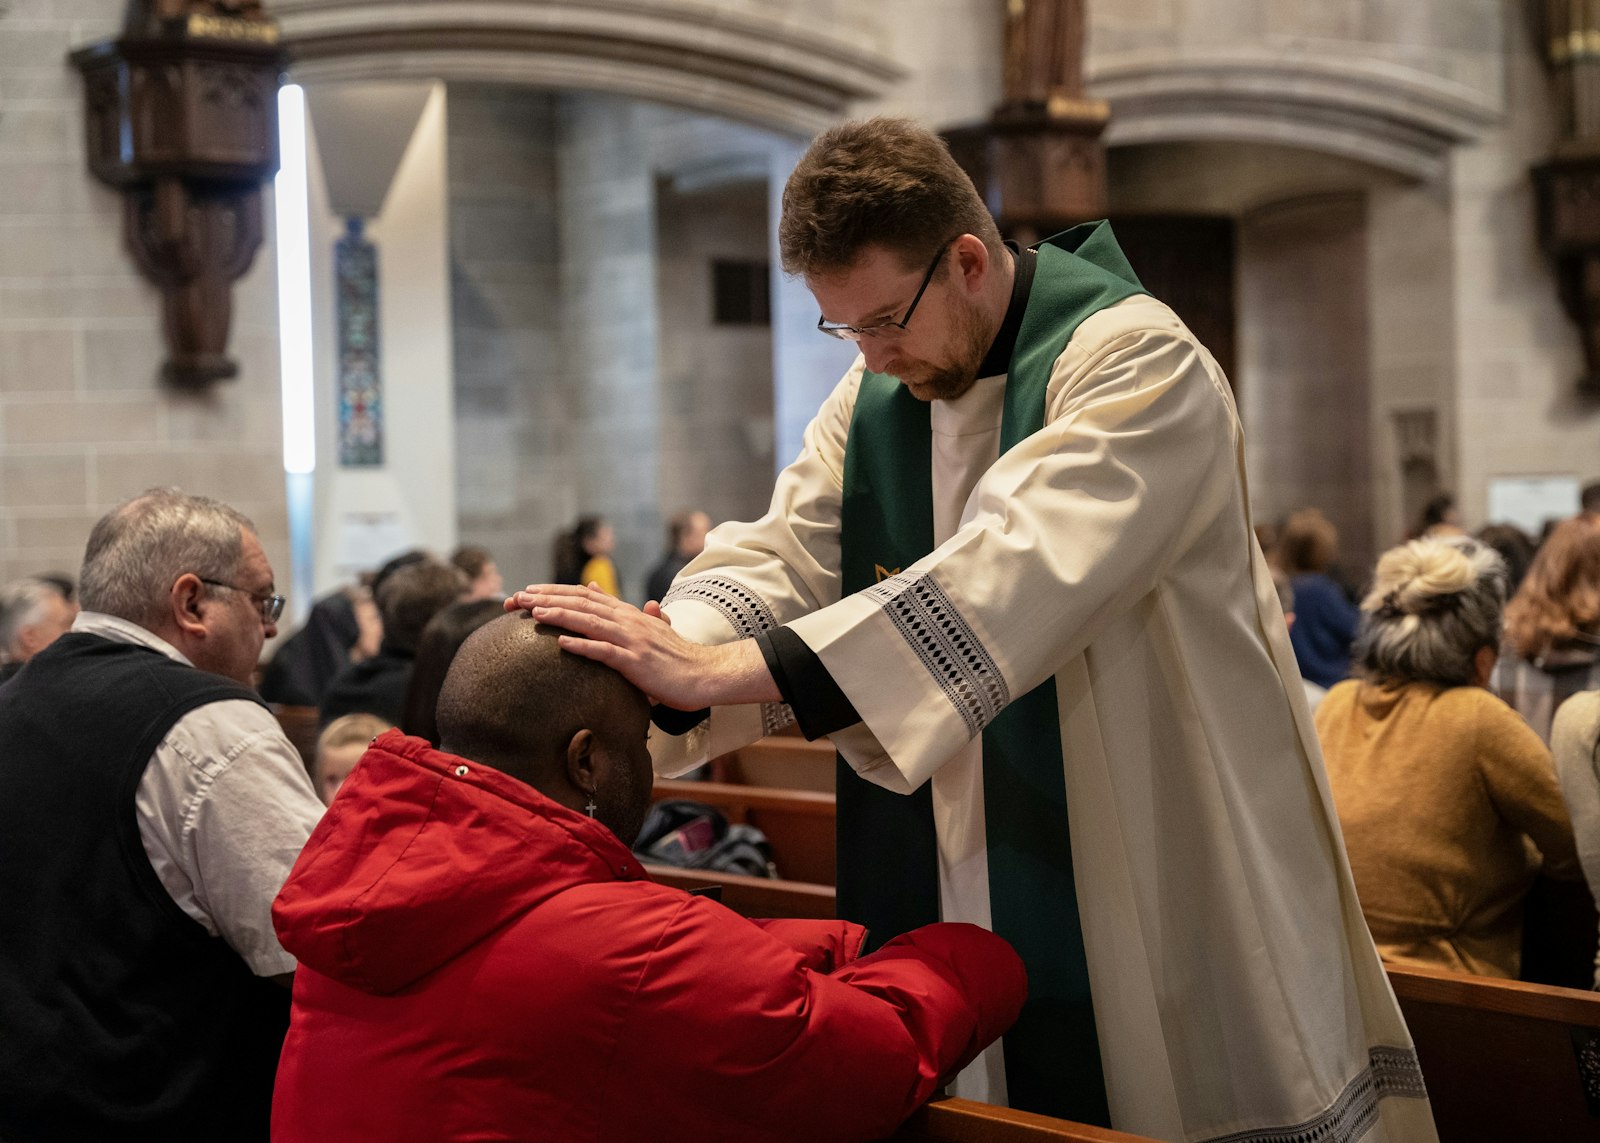 Fr. David Tomaszycki places his hands upon a parishioner's head during the anointing of the sick, one of the sacraments of healing.